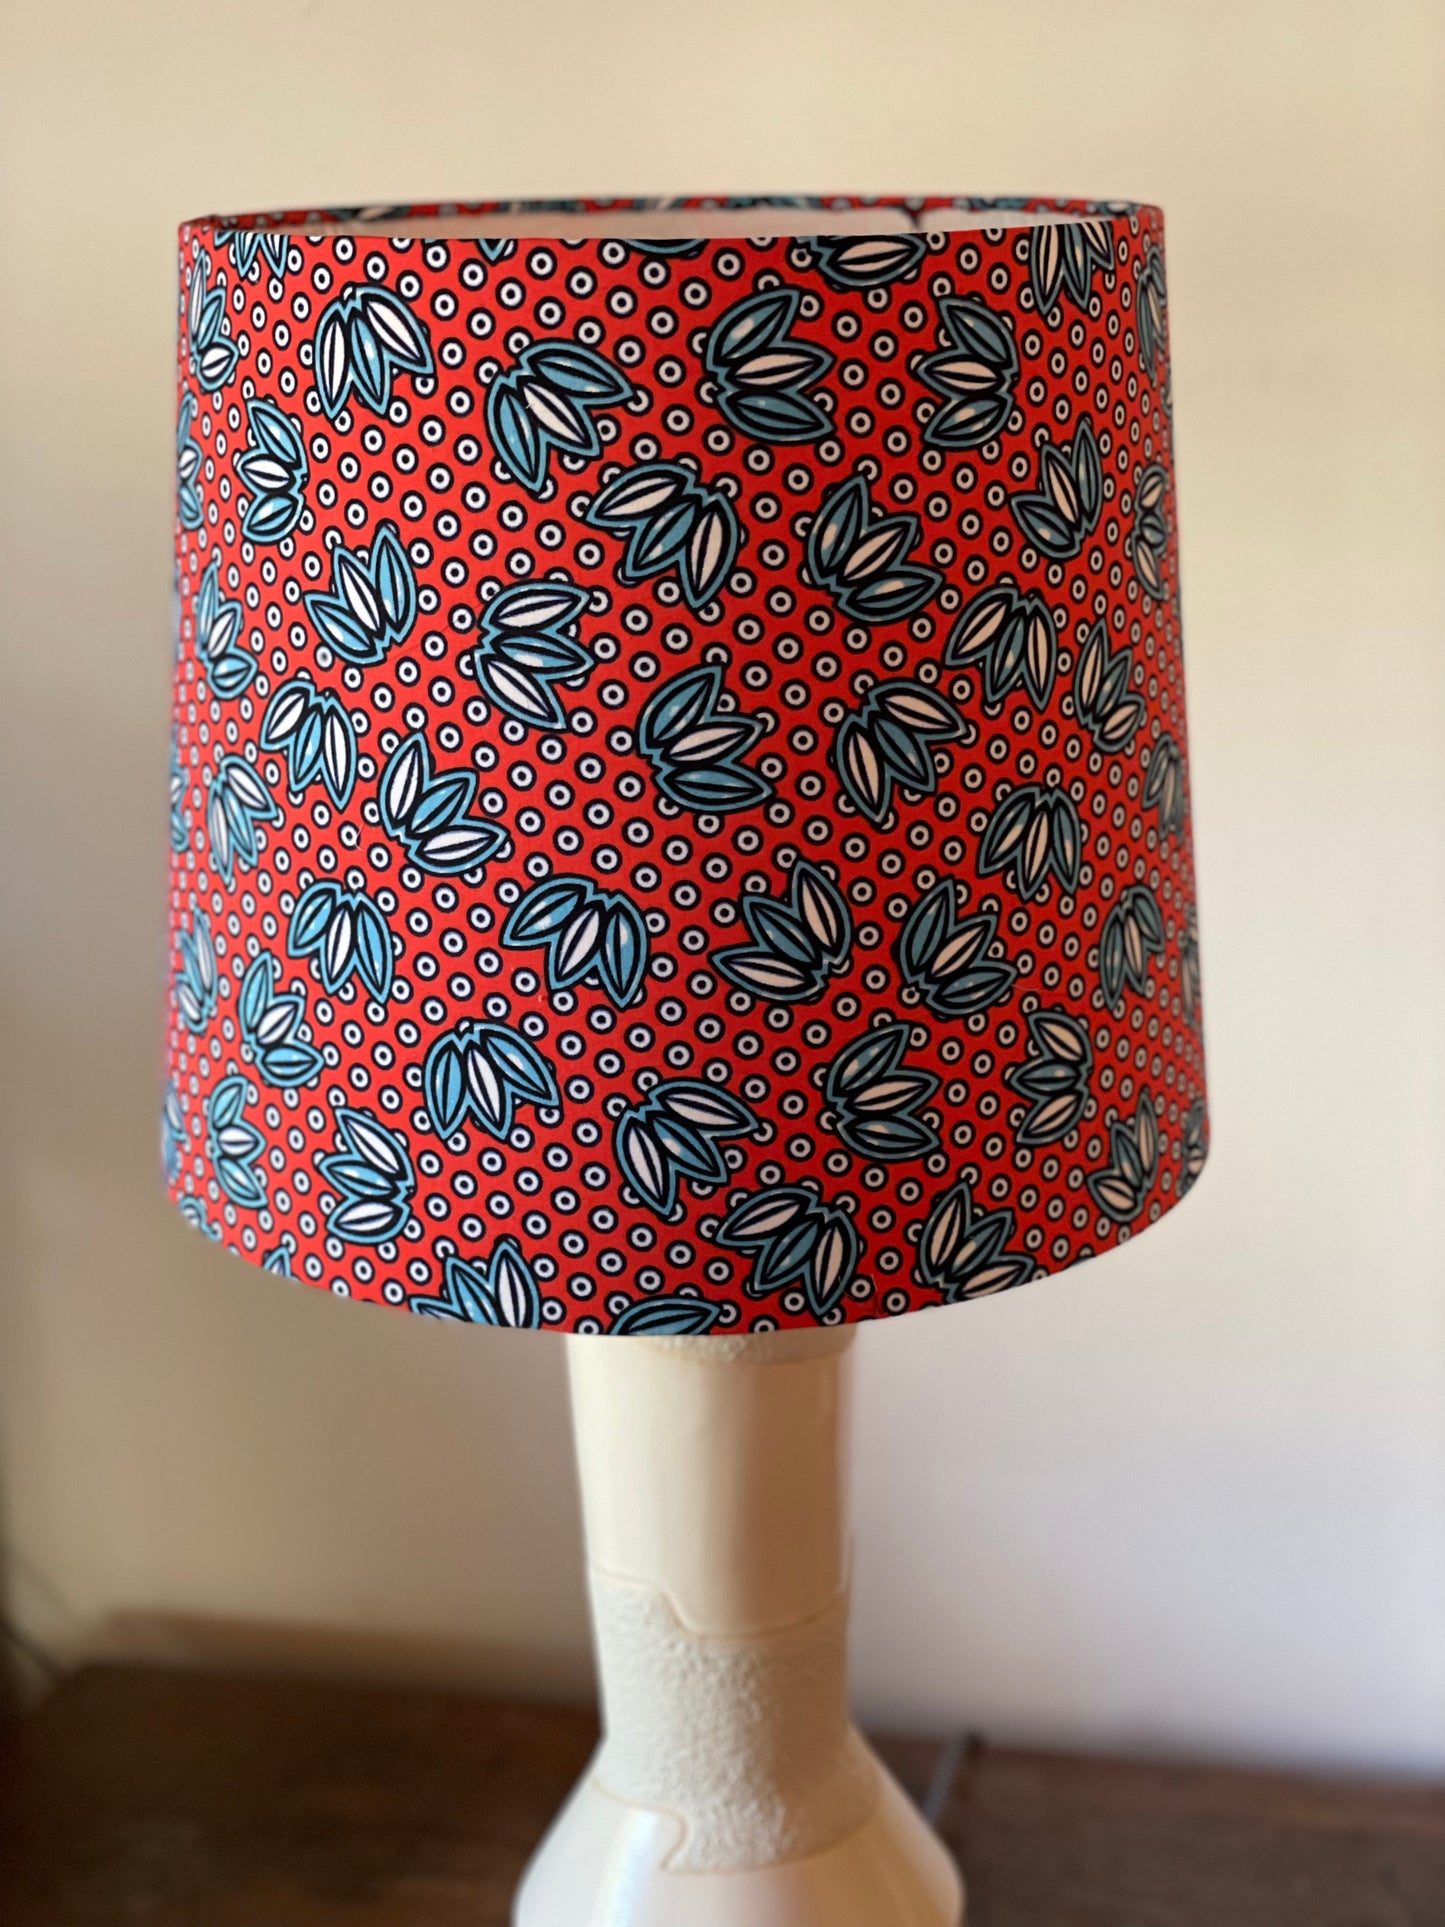 Large Empire Shade. 11.75 x 13.75 x 11.75. West African Ankara Fabric. Bright Red with Blue and White Floral and Circular Detail.